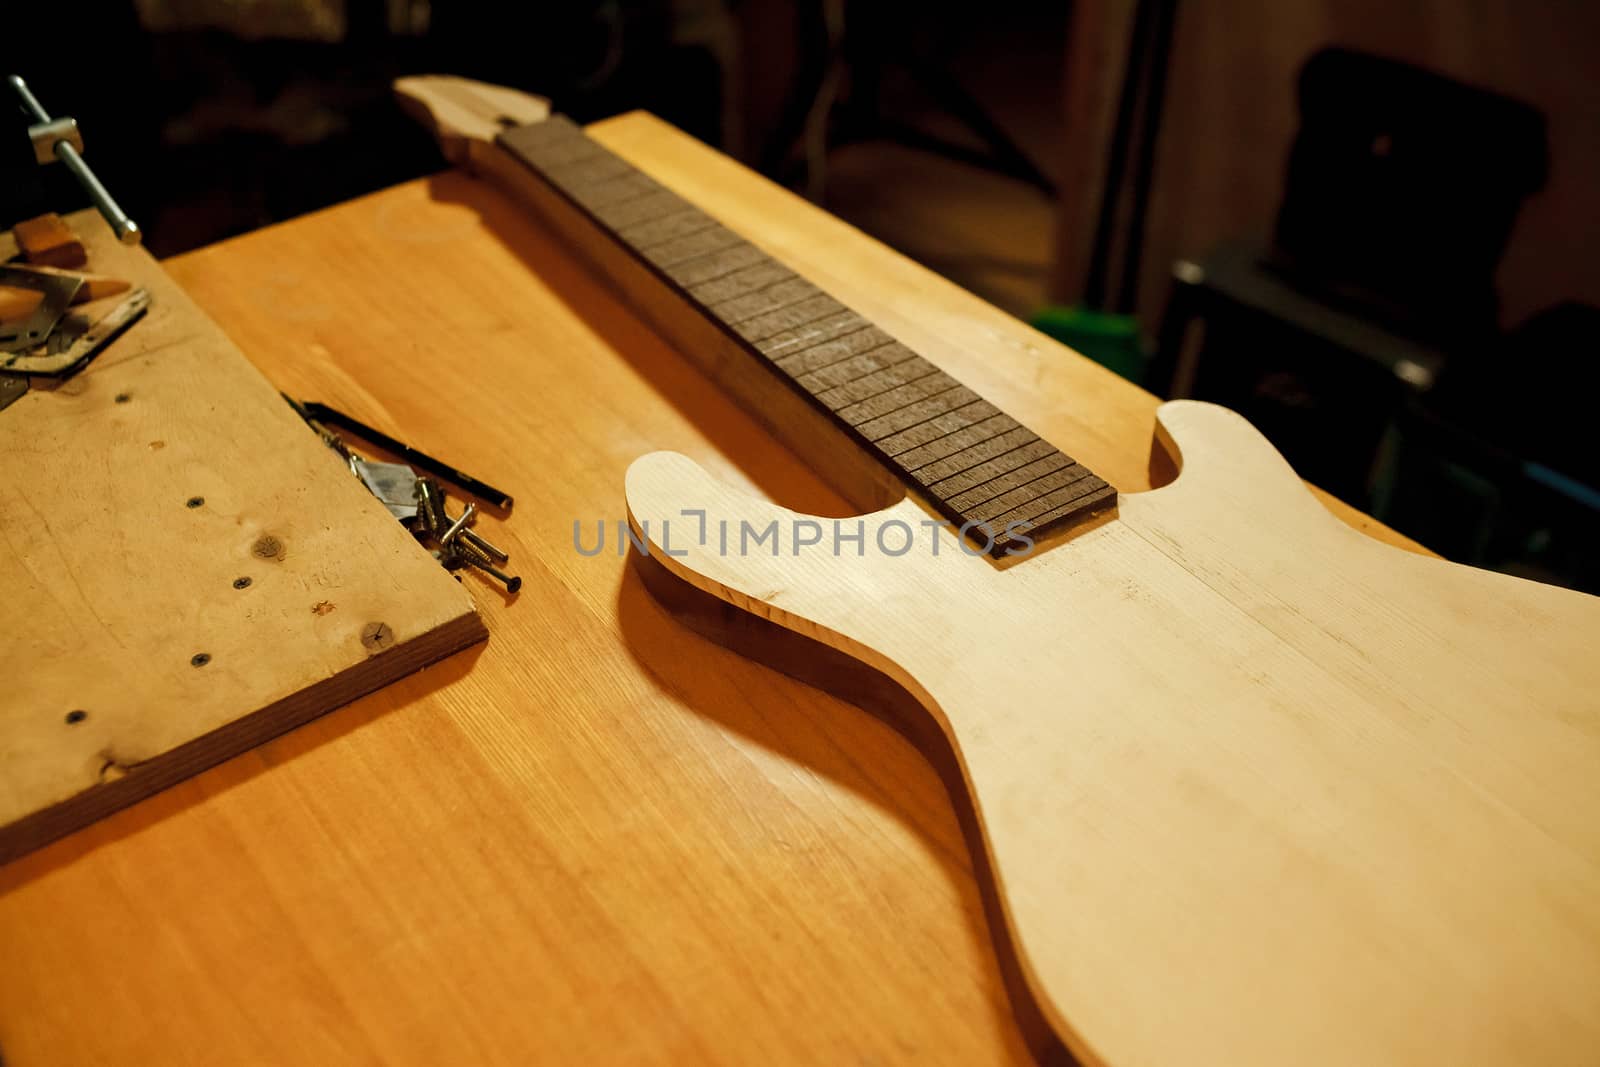 Billet of wood for bass guitar. Manufacture and repair of musical instruments. Installing the guitar frets.